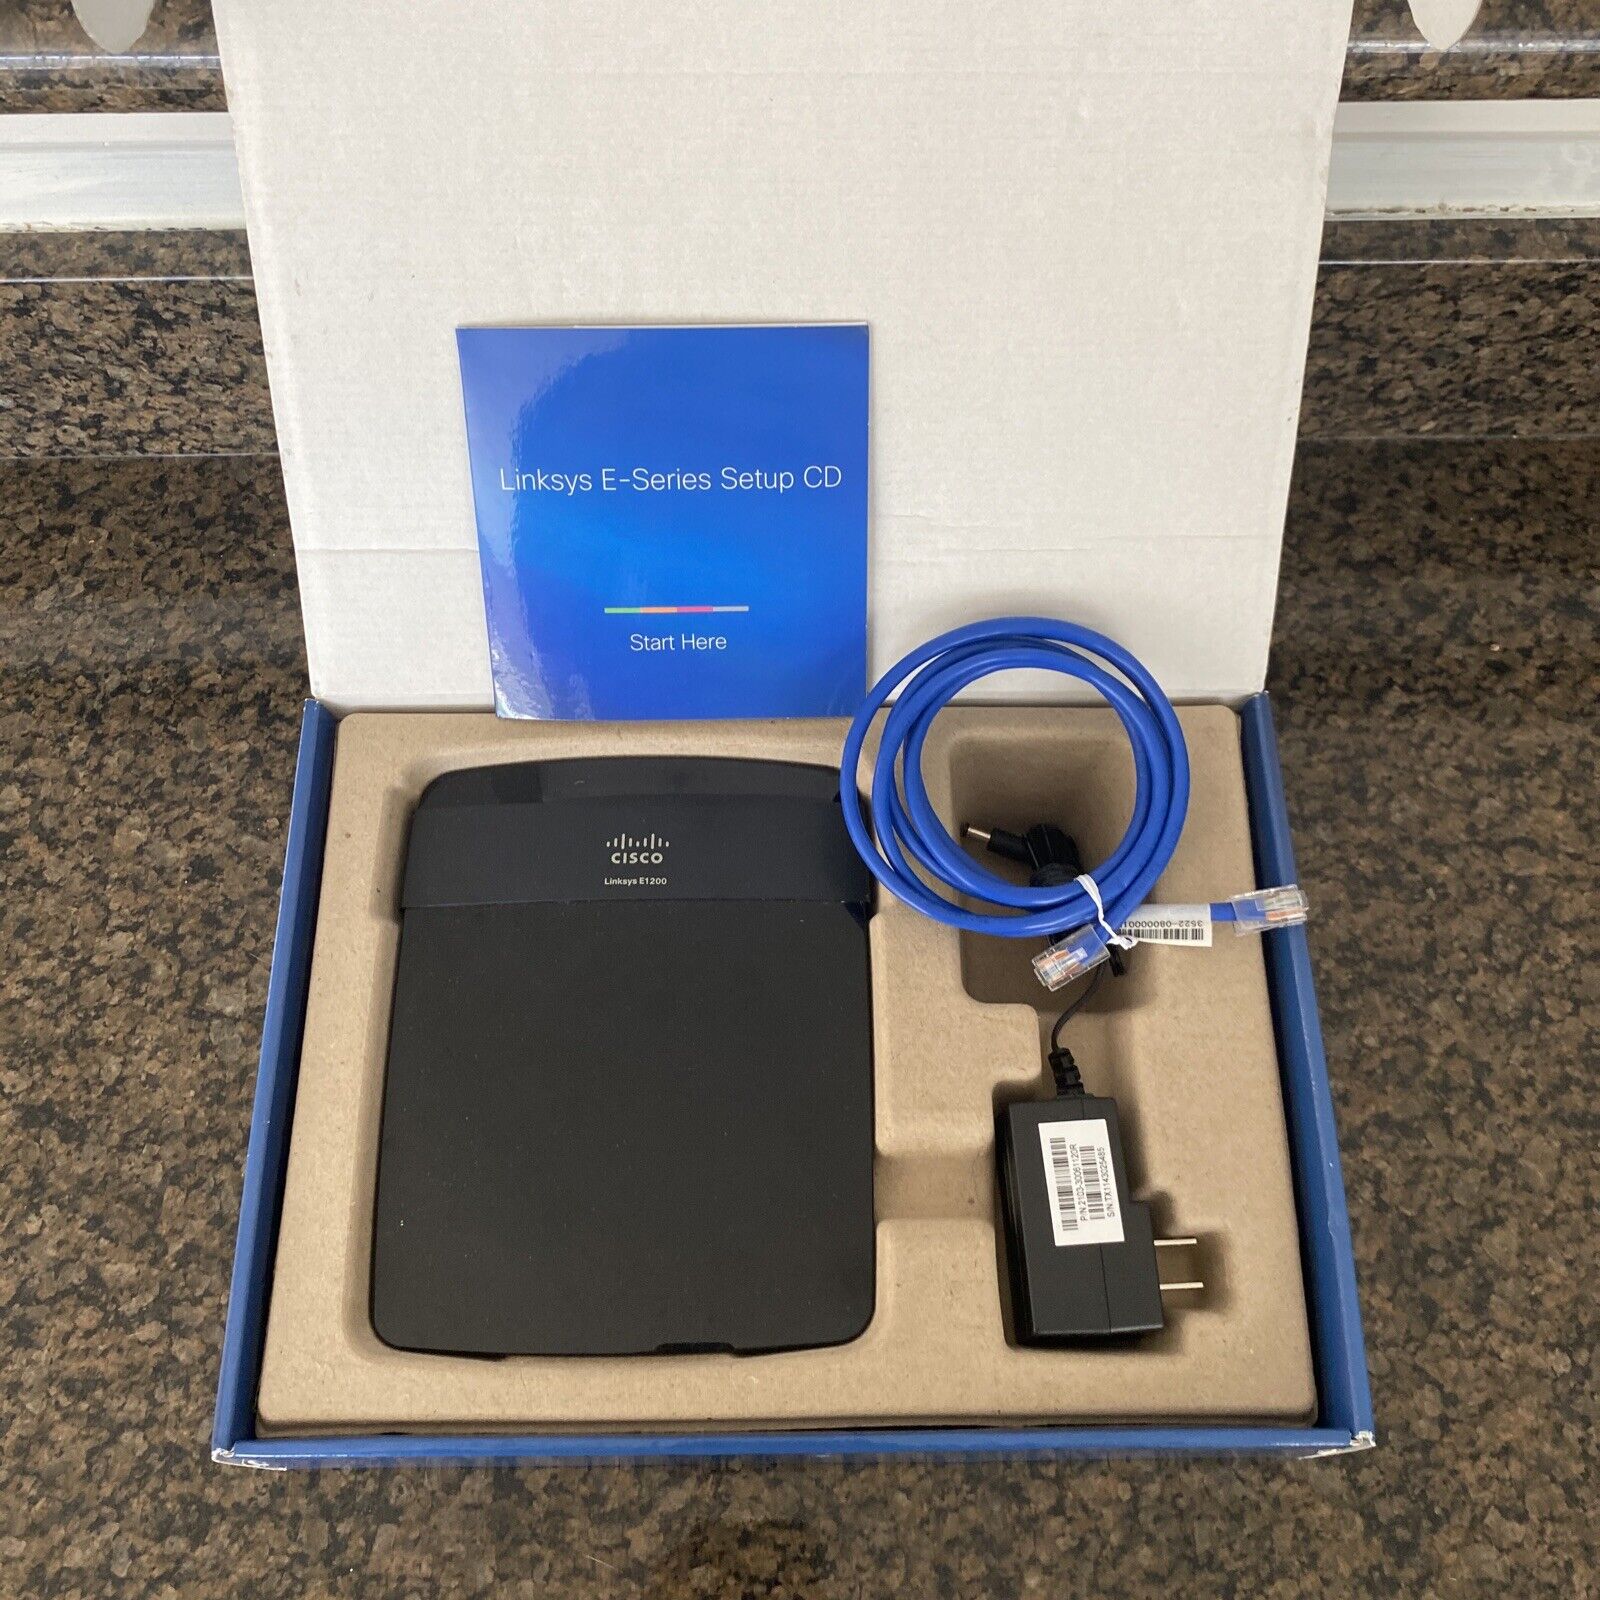 Cisco Linksys E1200 Wireless N-Router Bundle  Ethernet Cable,  Adapter, CD-ROM